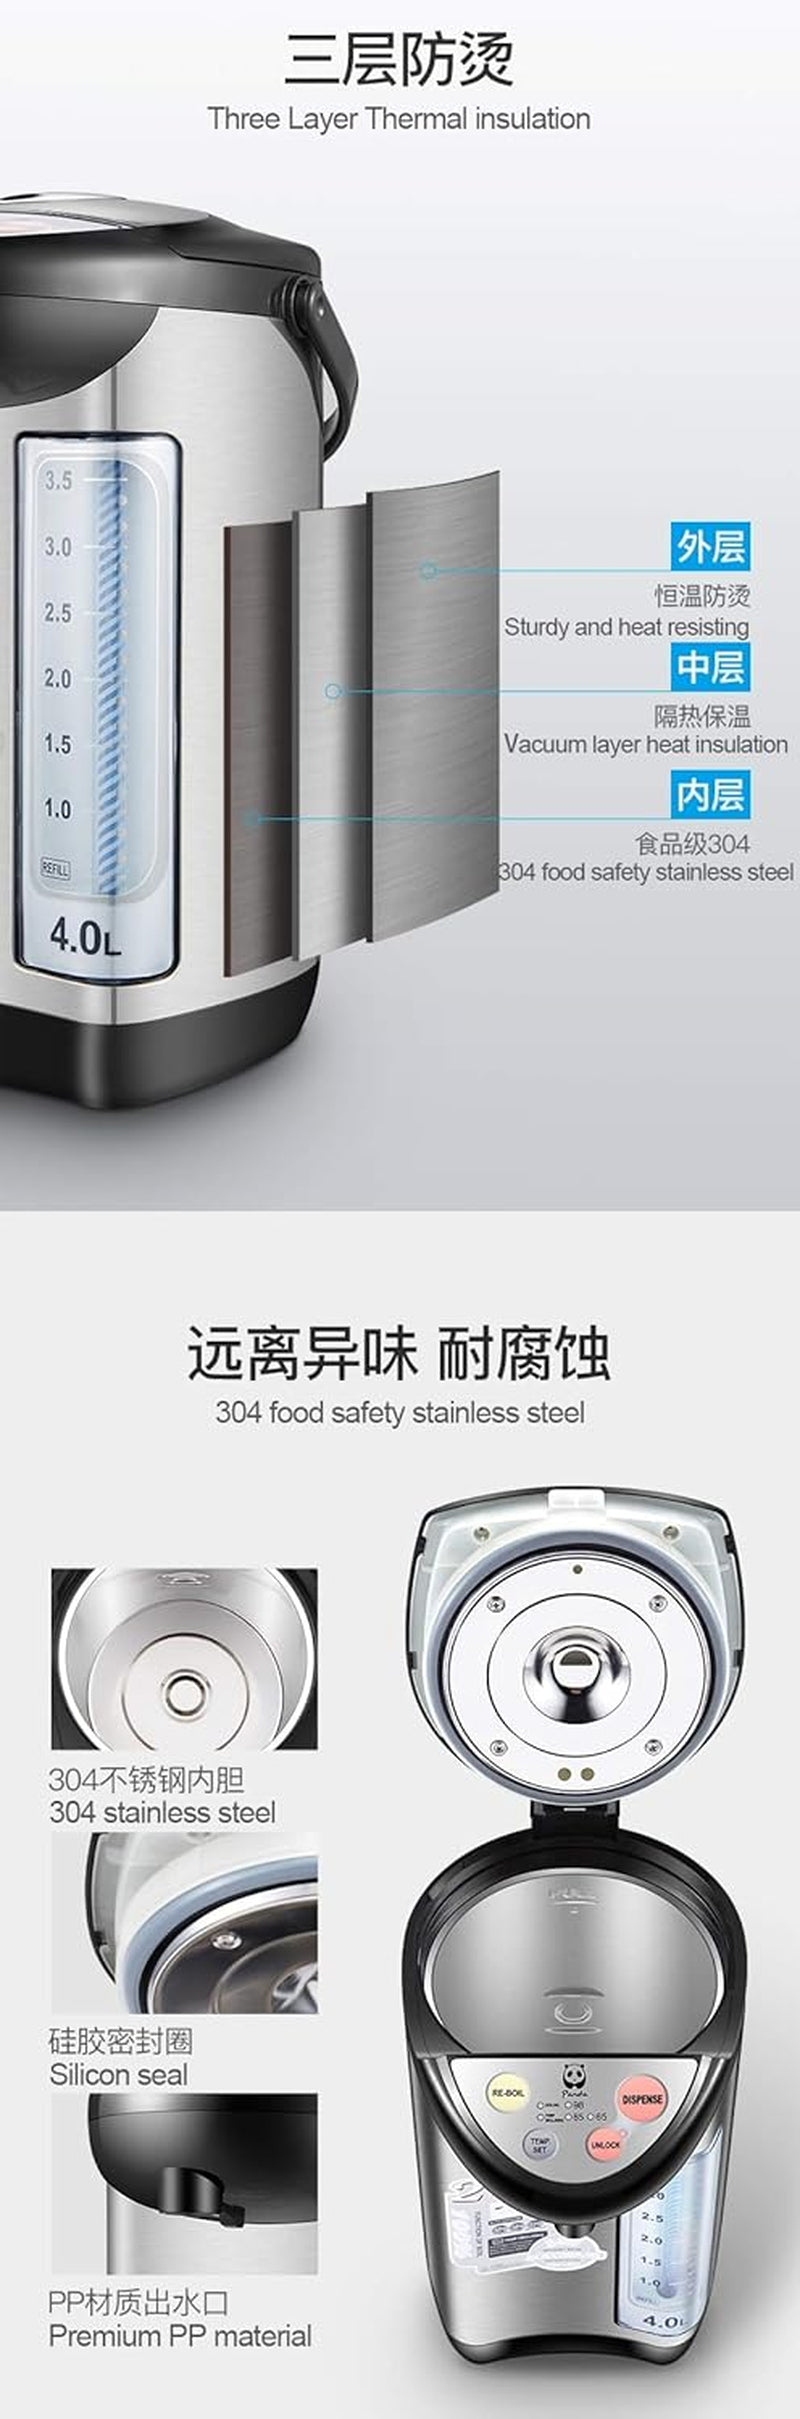 Panda Electric Hot Water Boiler and Warmer, Hot Water Dispenser, 304 Stainless Steel Interior (Stainless Steel/Brown, 4.0 Liter)